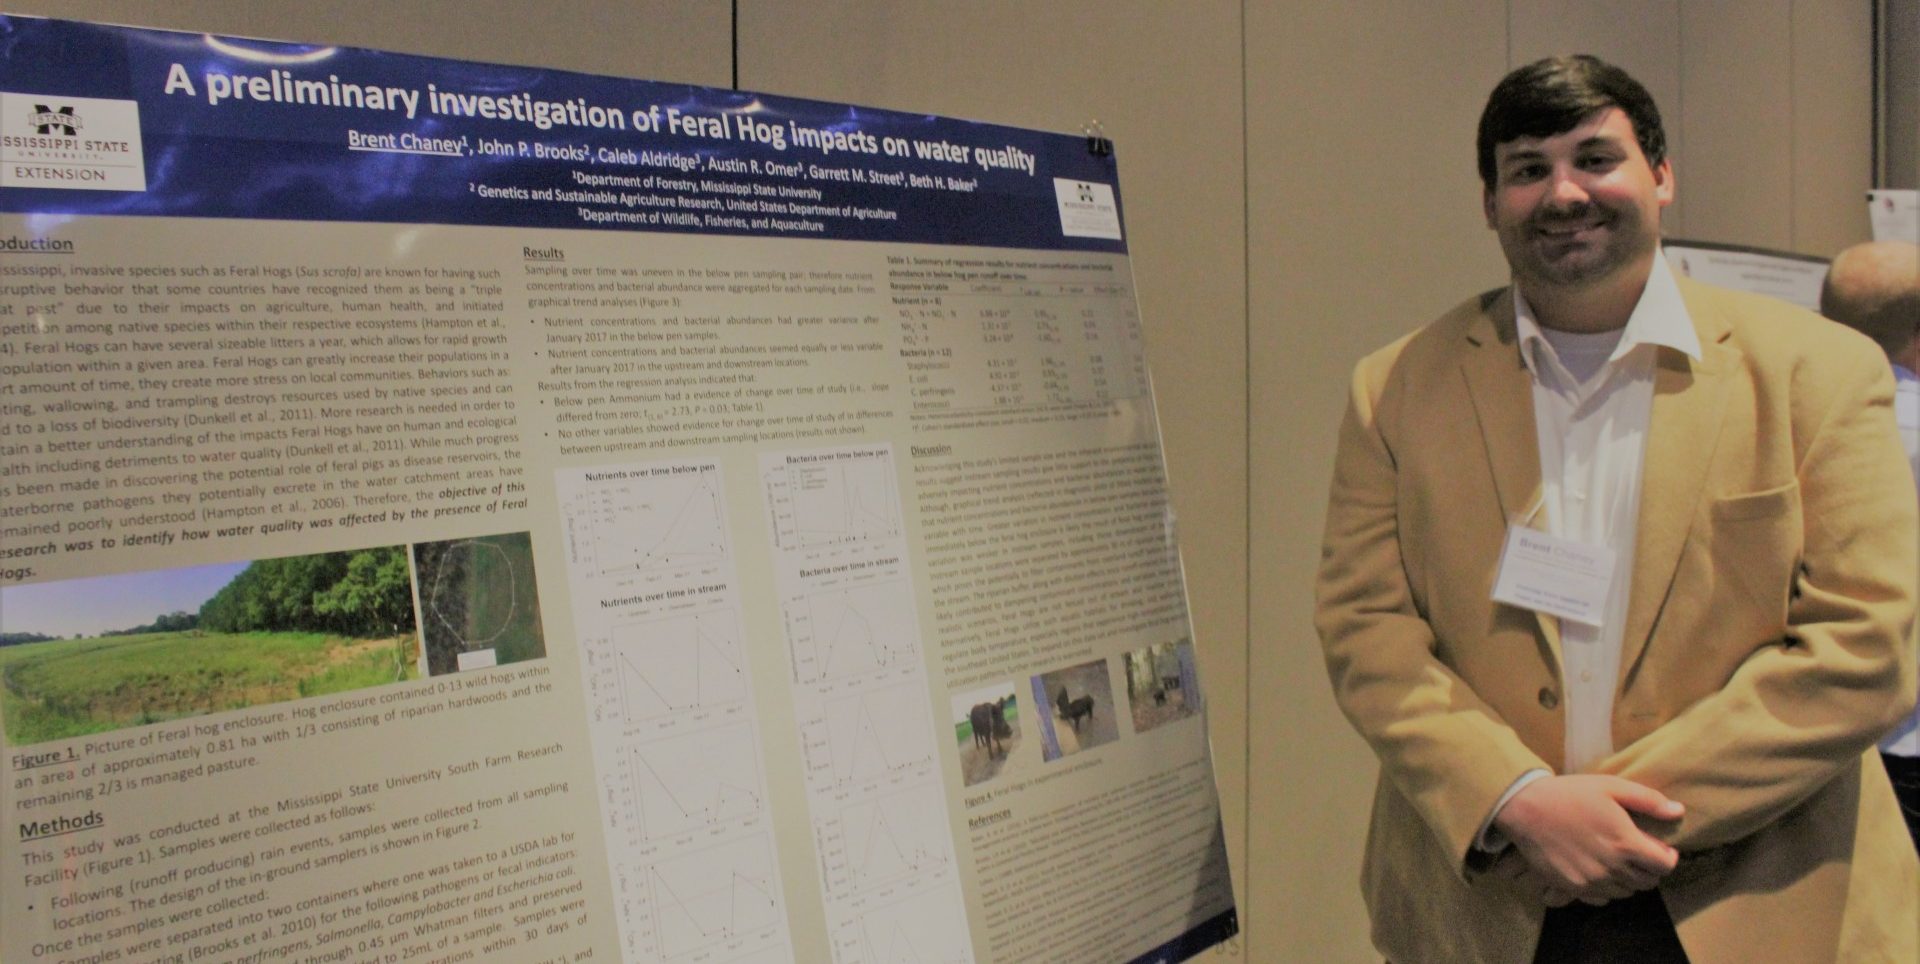 Undergraduate student Brent Chaney, advised by Beth Baker of Mississippi State University, won first place in the undergraduate student poster competition.